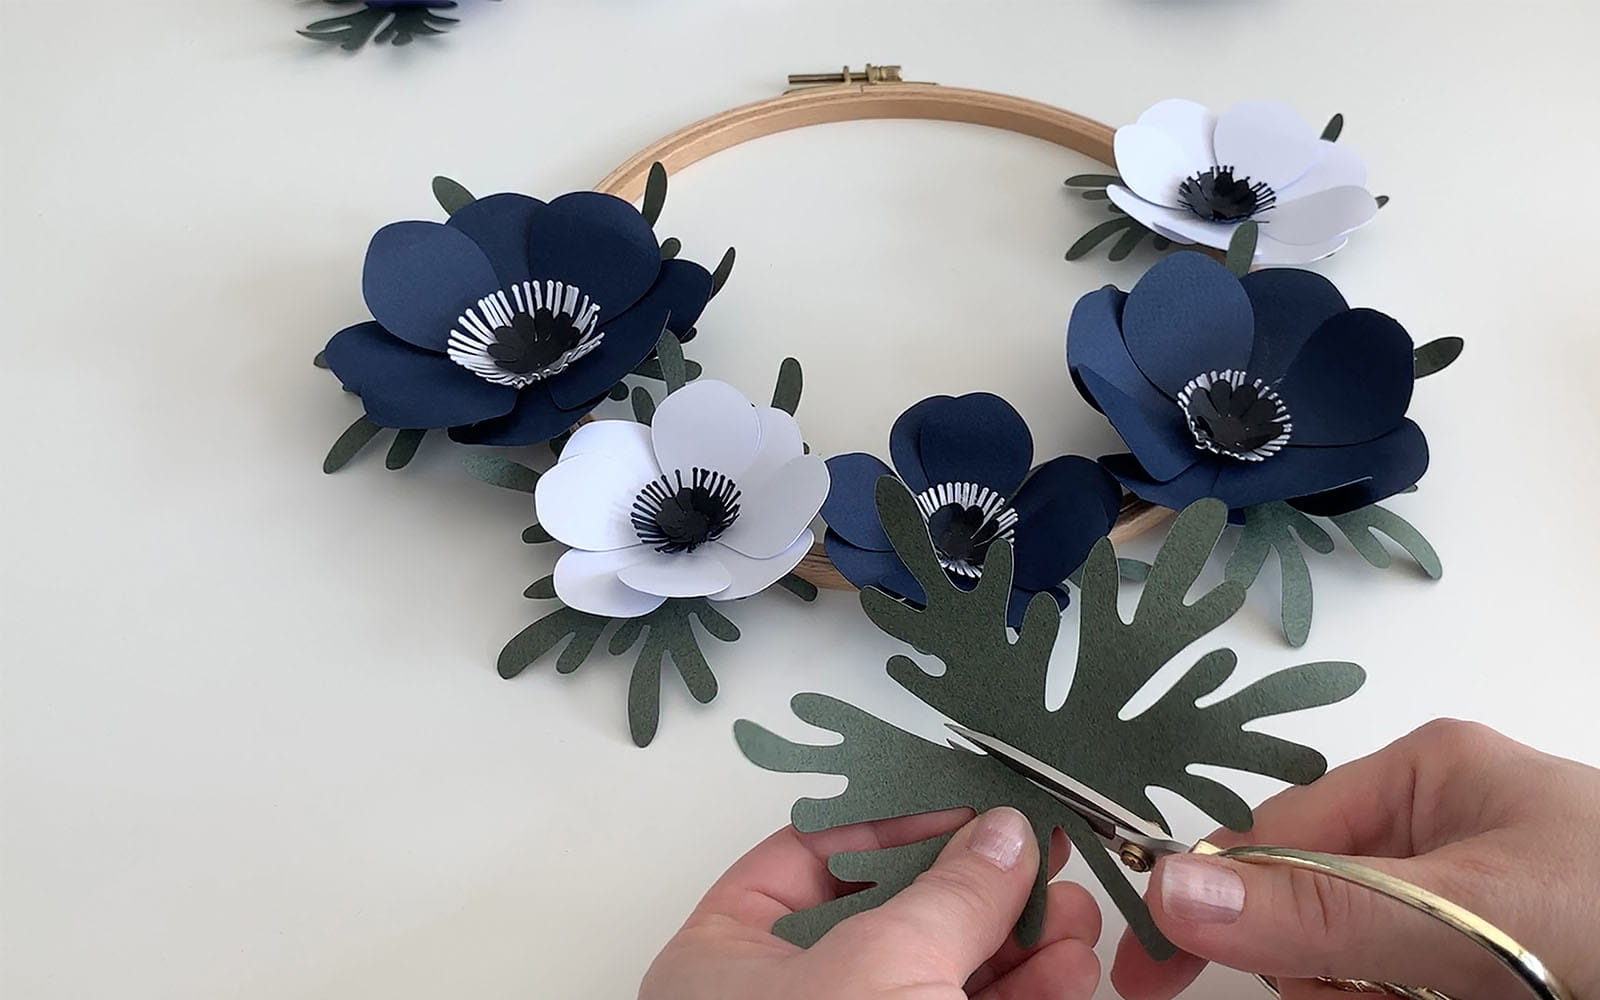 Hands cutting a green paper leaf to stick on embroidery frame wreath